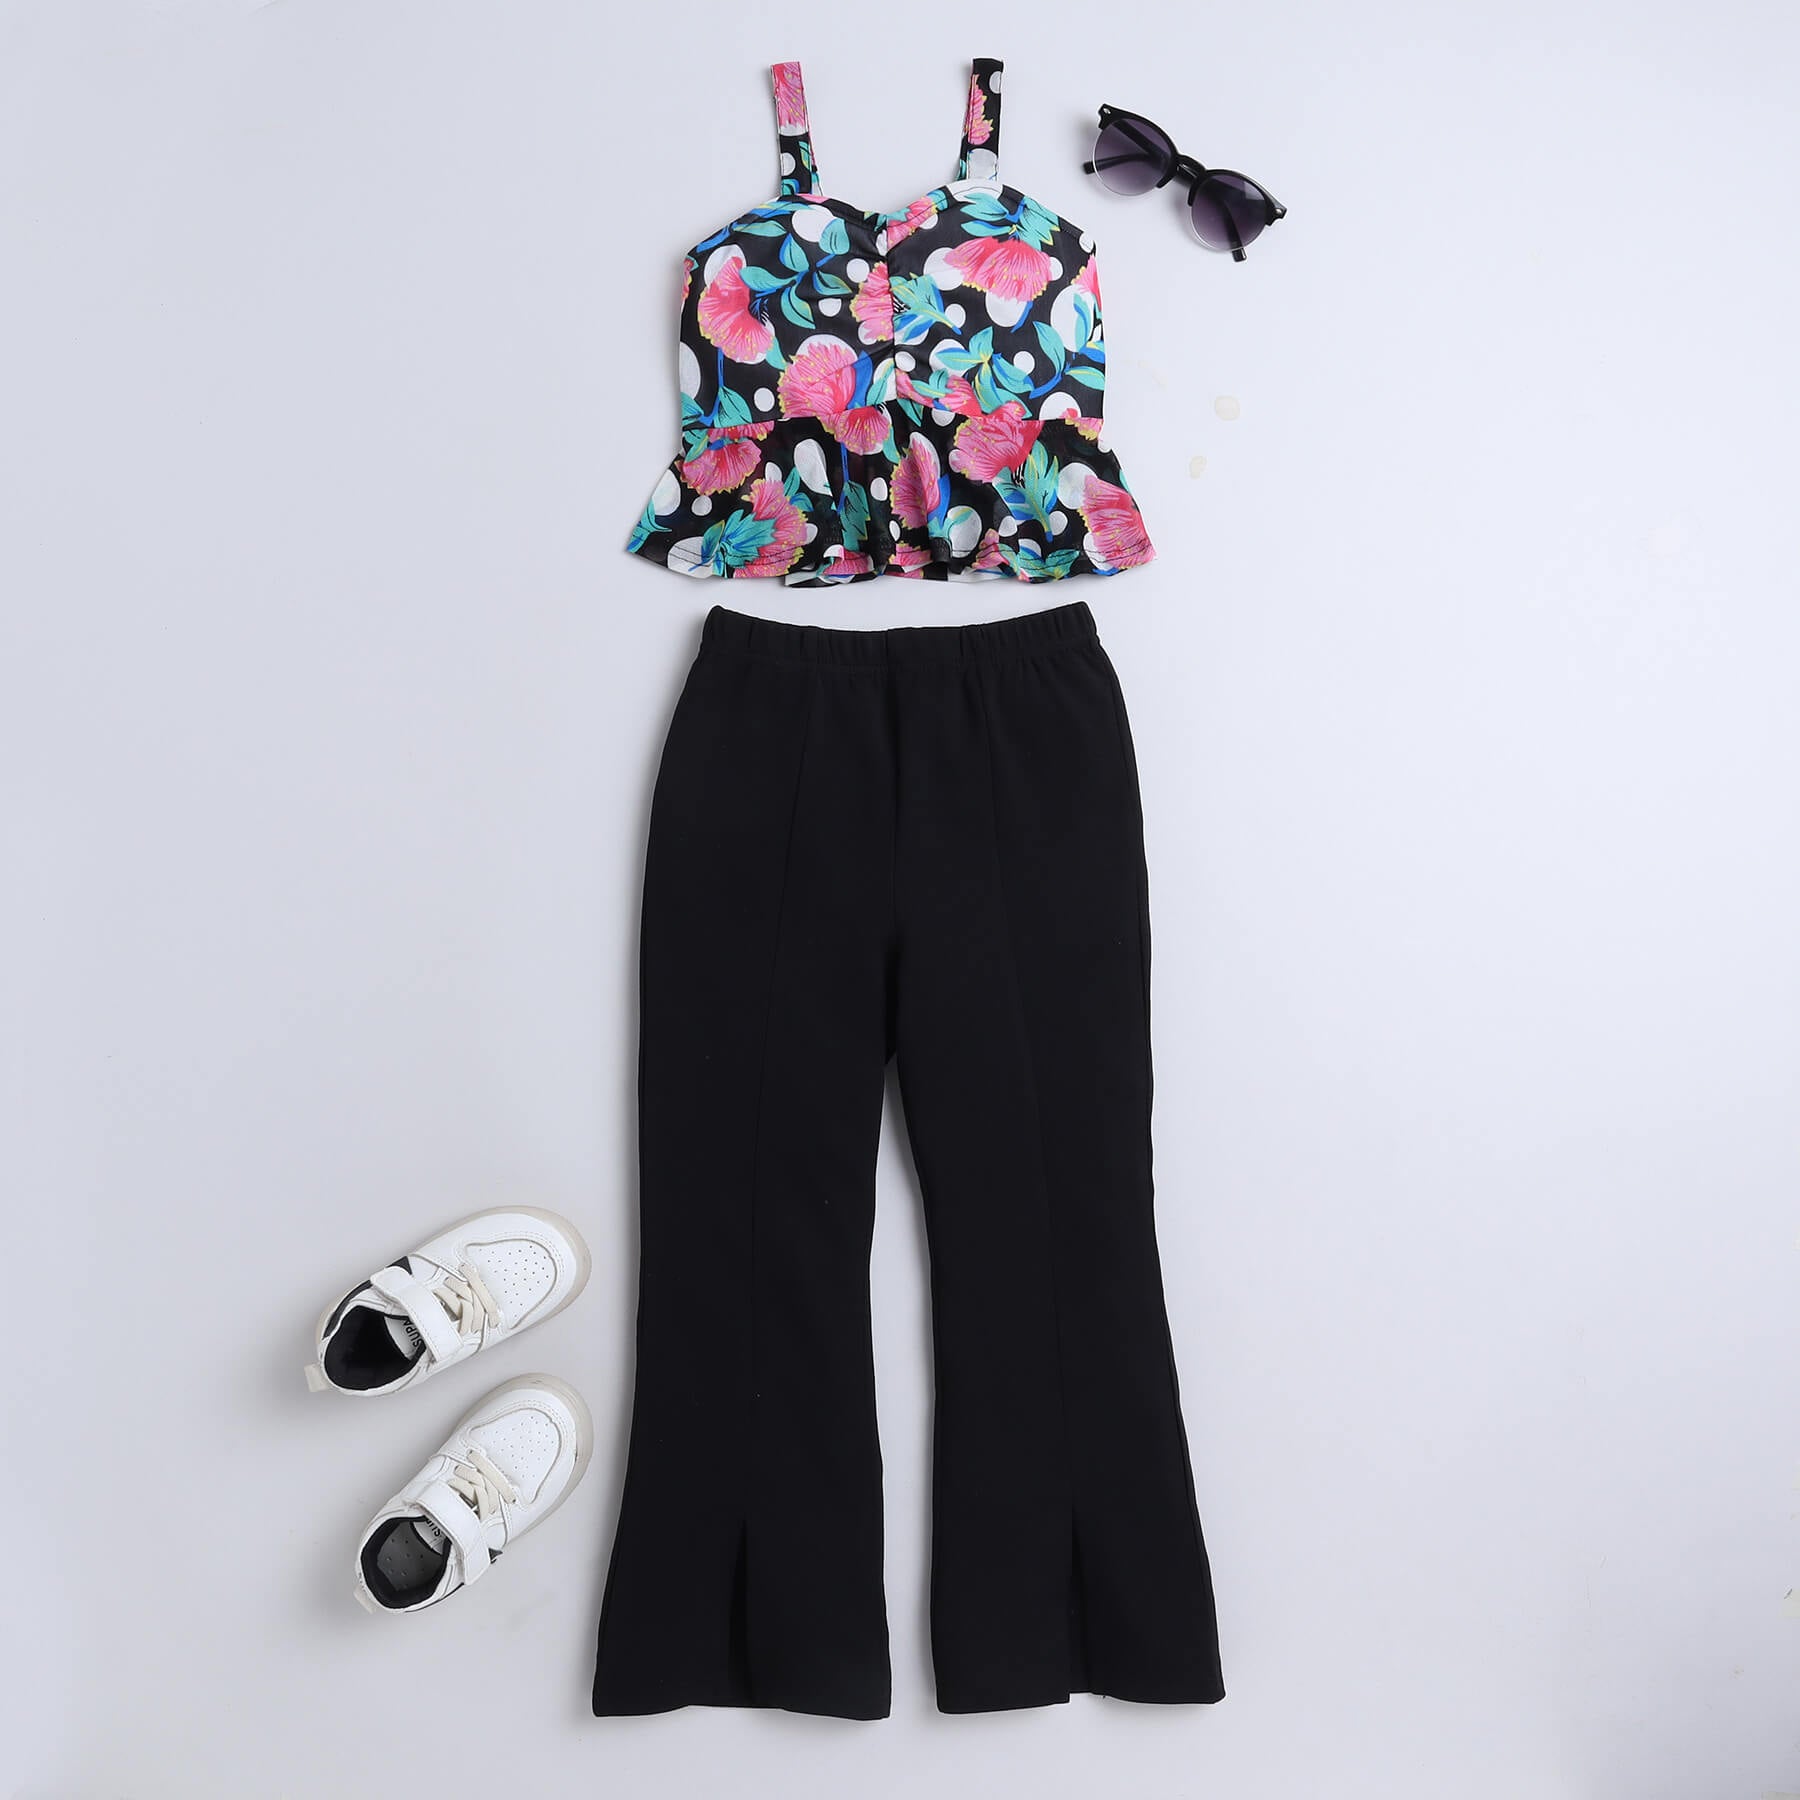 Taffykids floral printed front ruched peplum top with solid front slit bell bottom pant set-Black/Multi